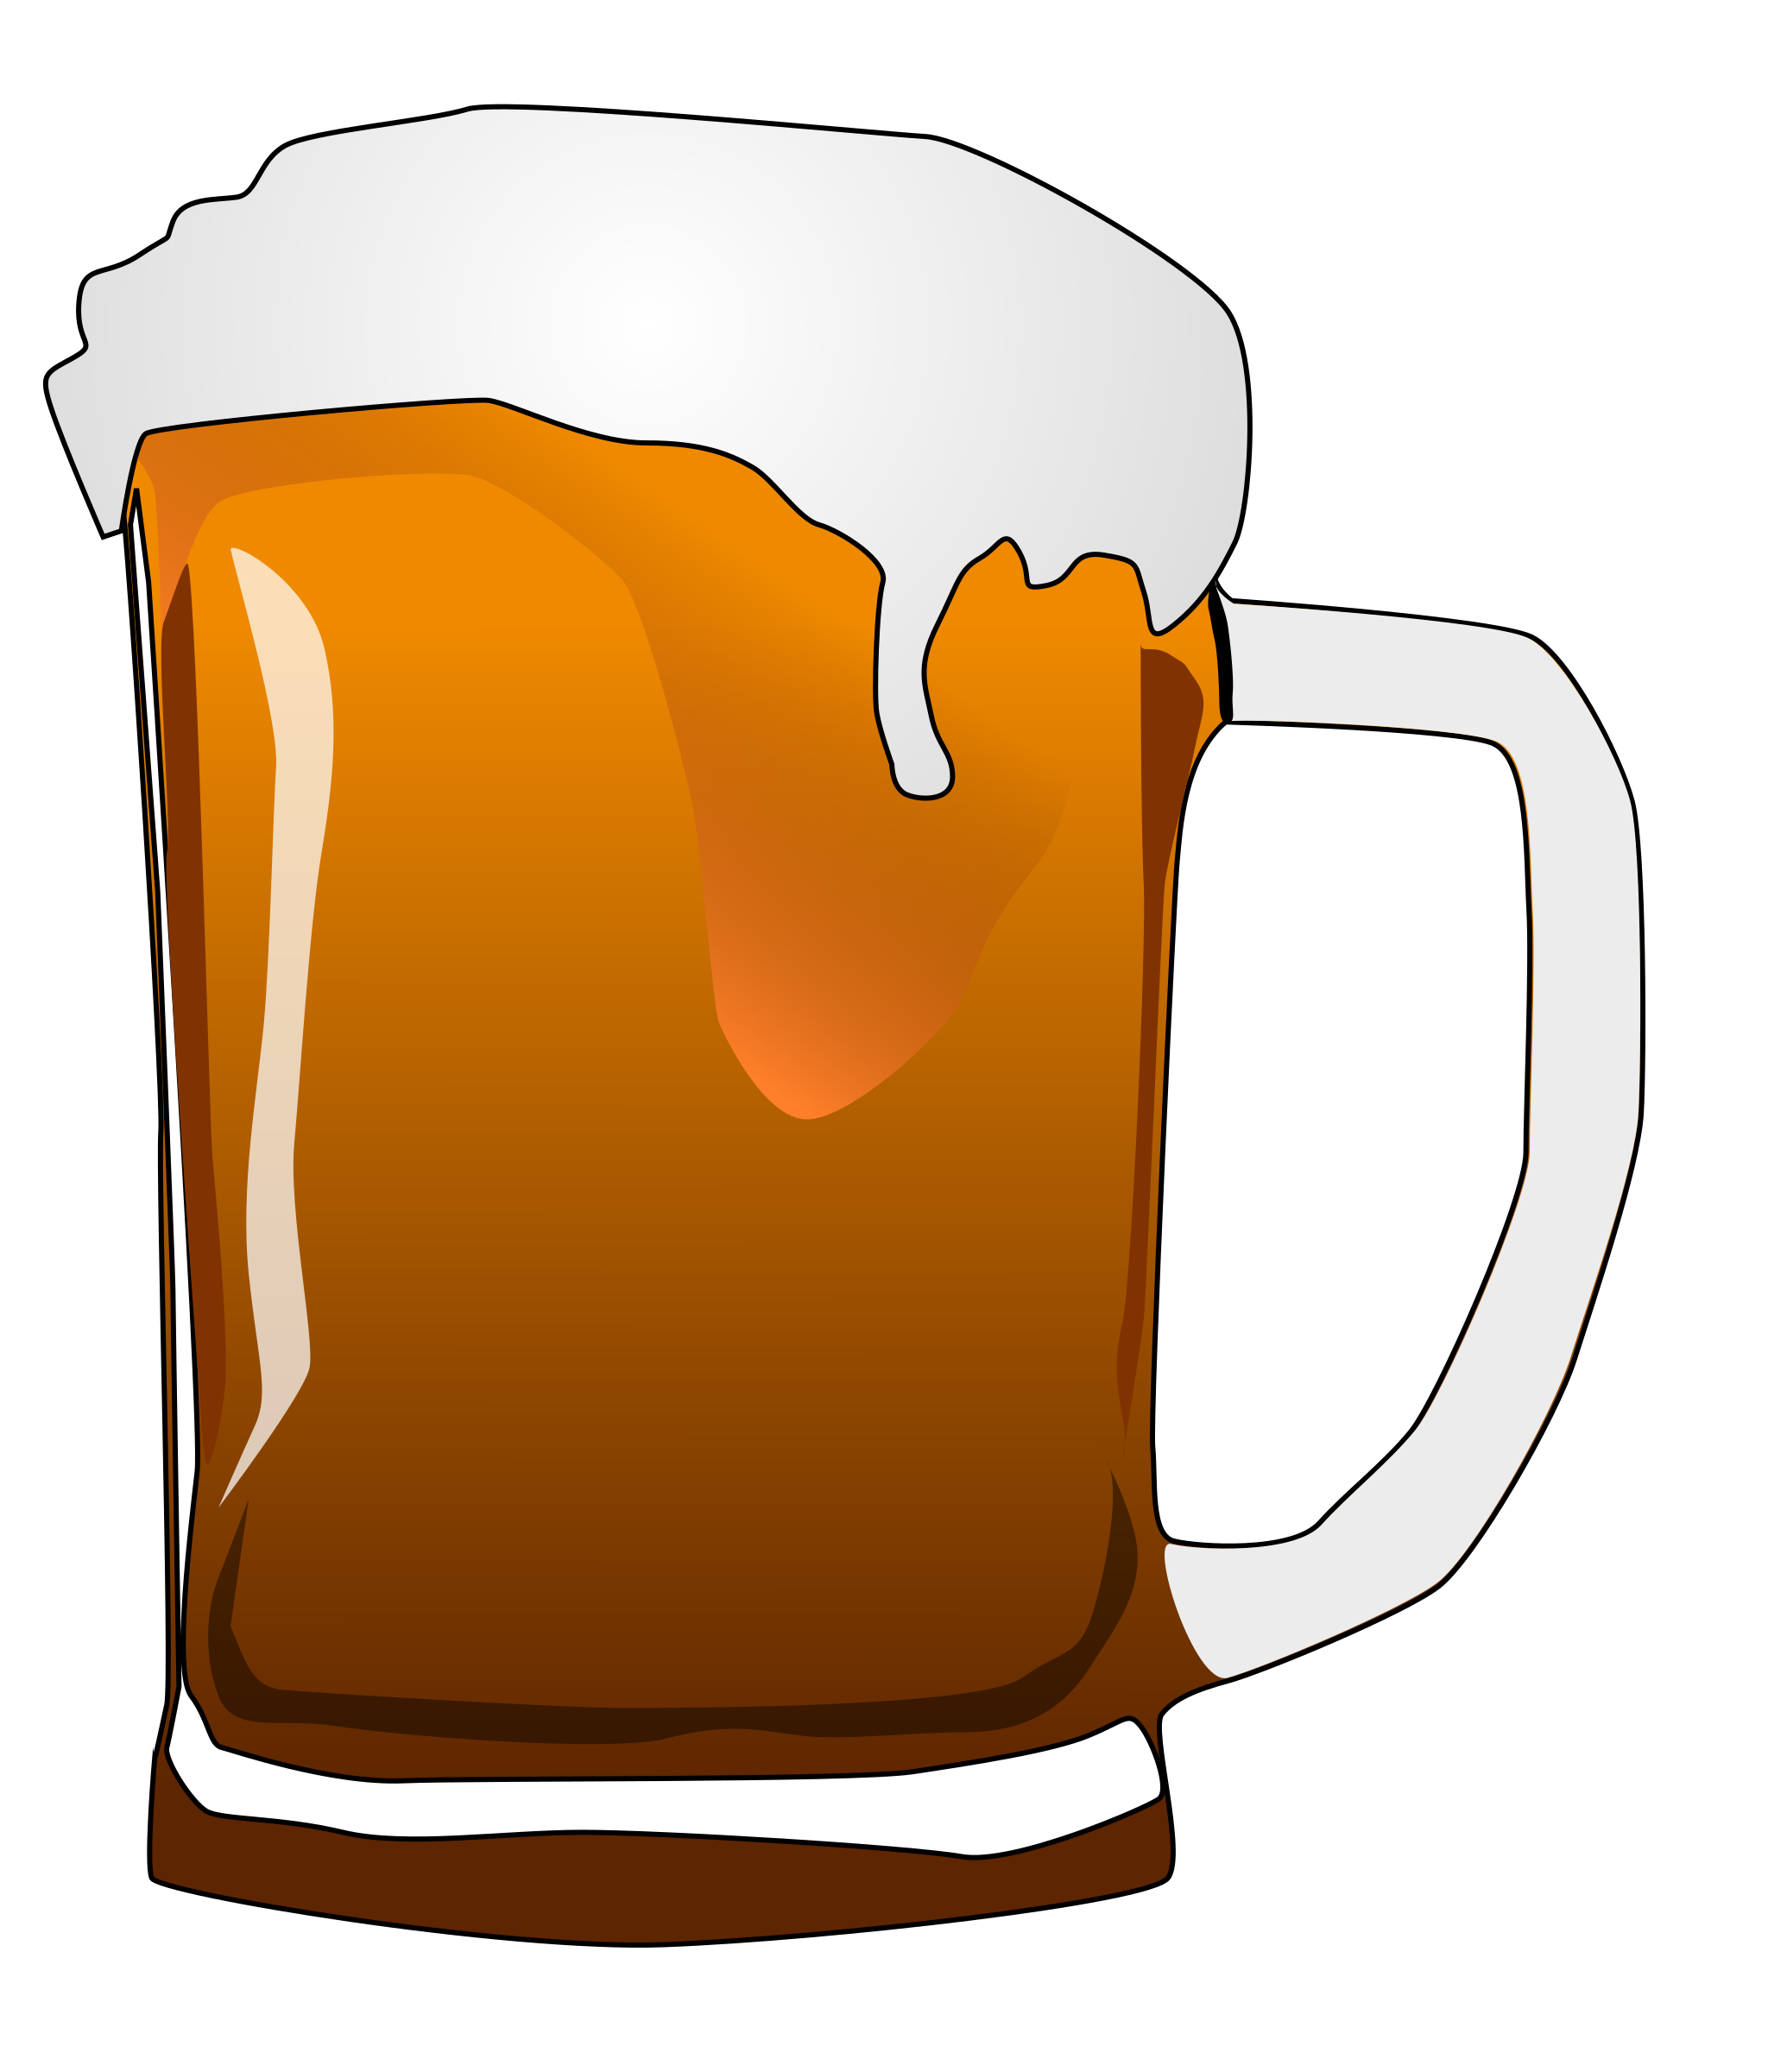 Drinking clipart beerclip. Beer icons png free